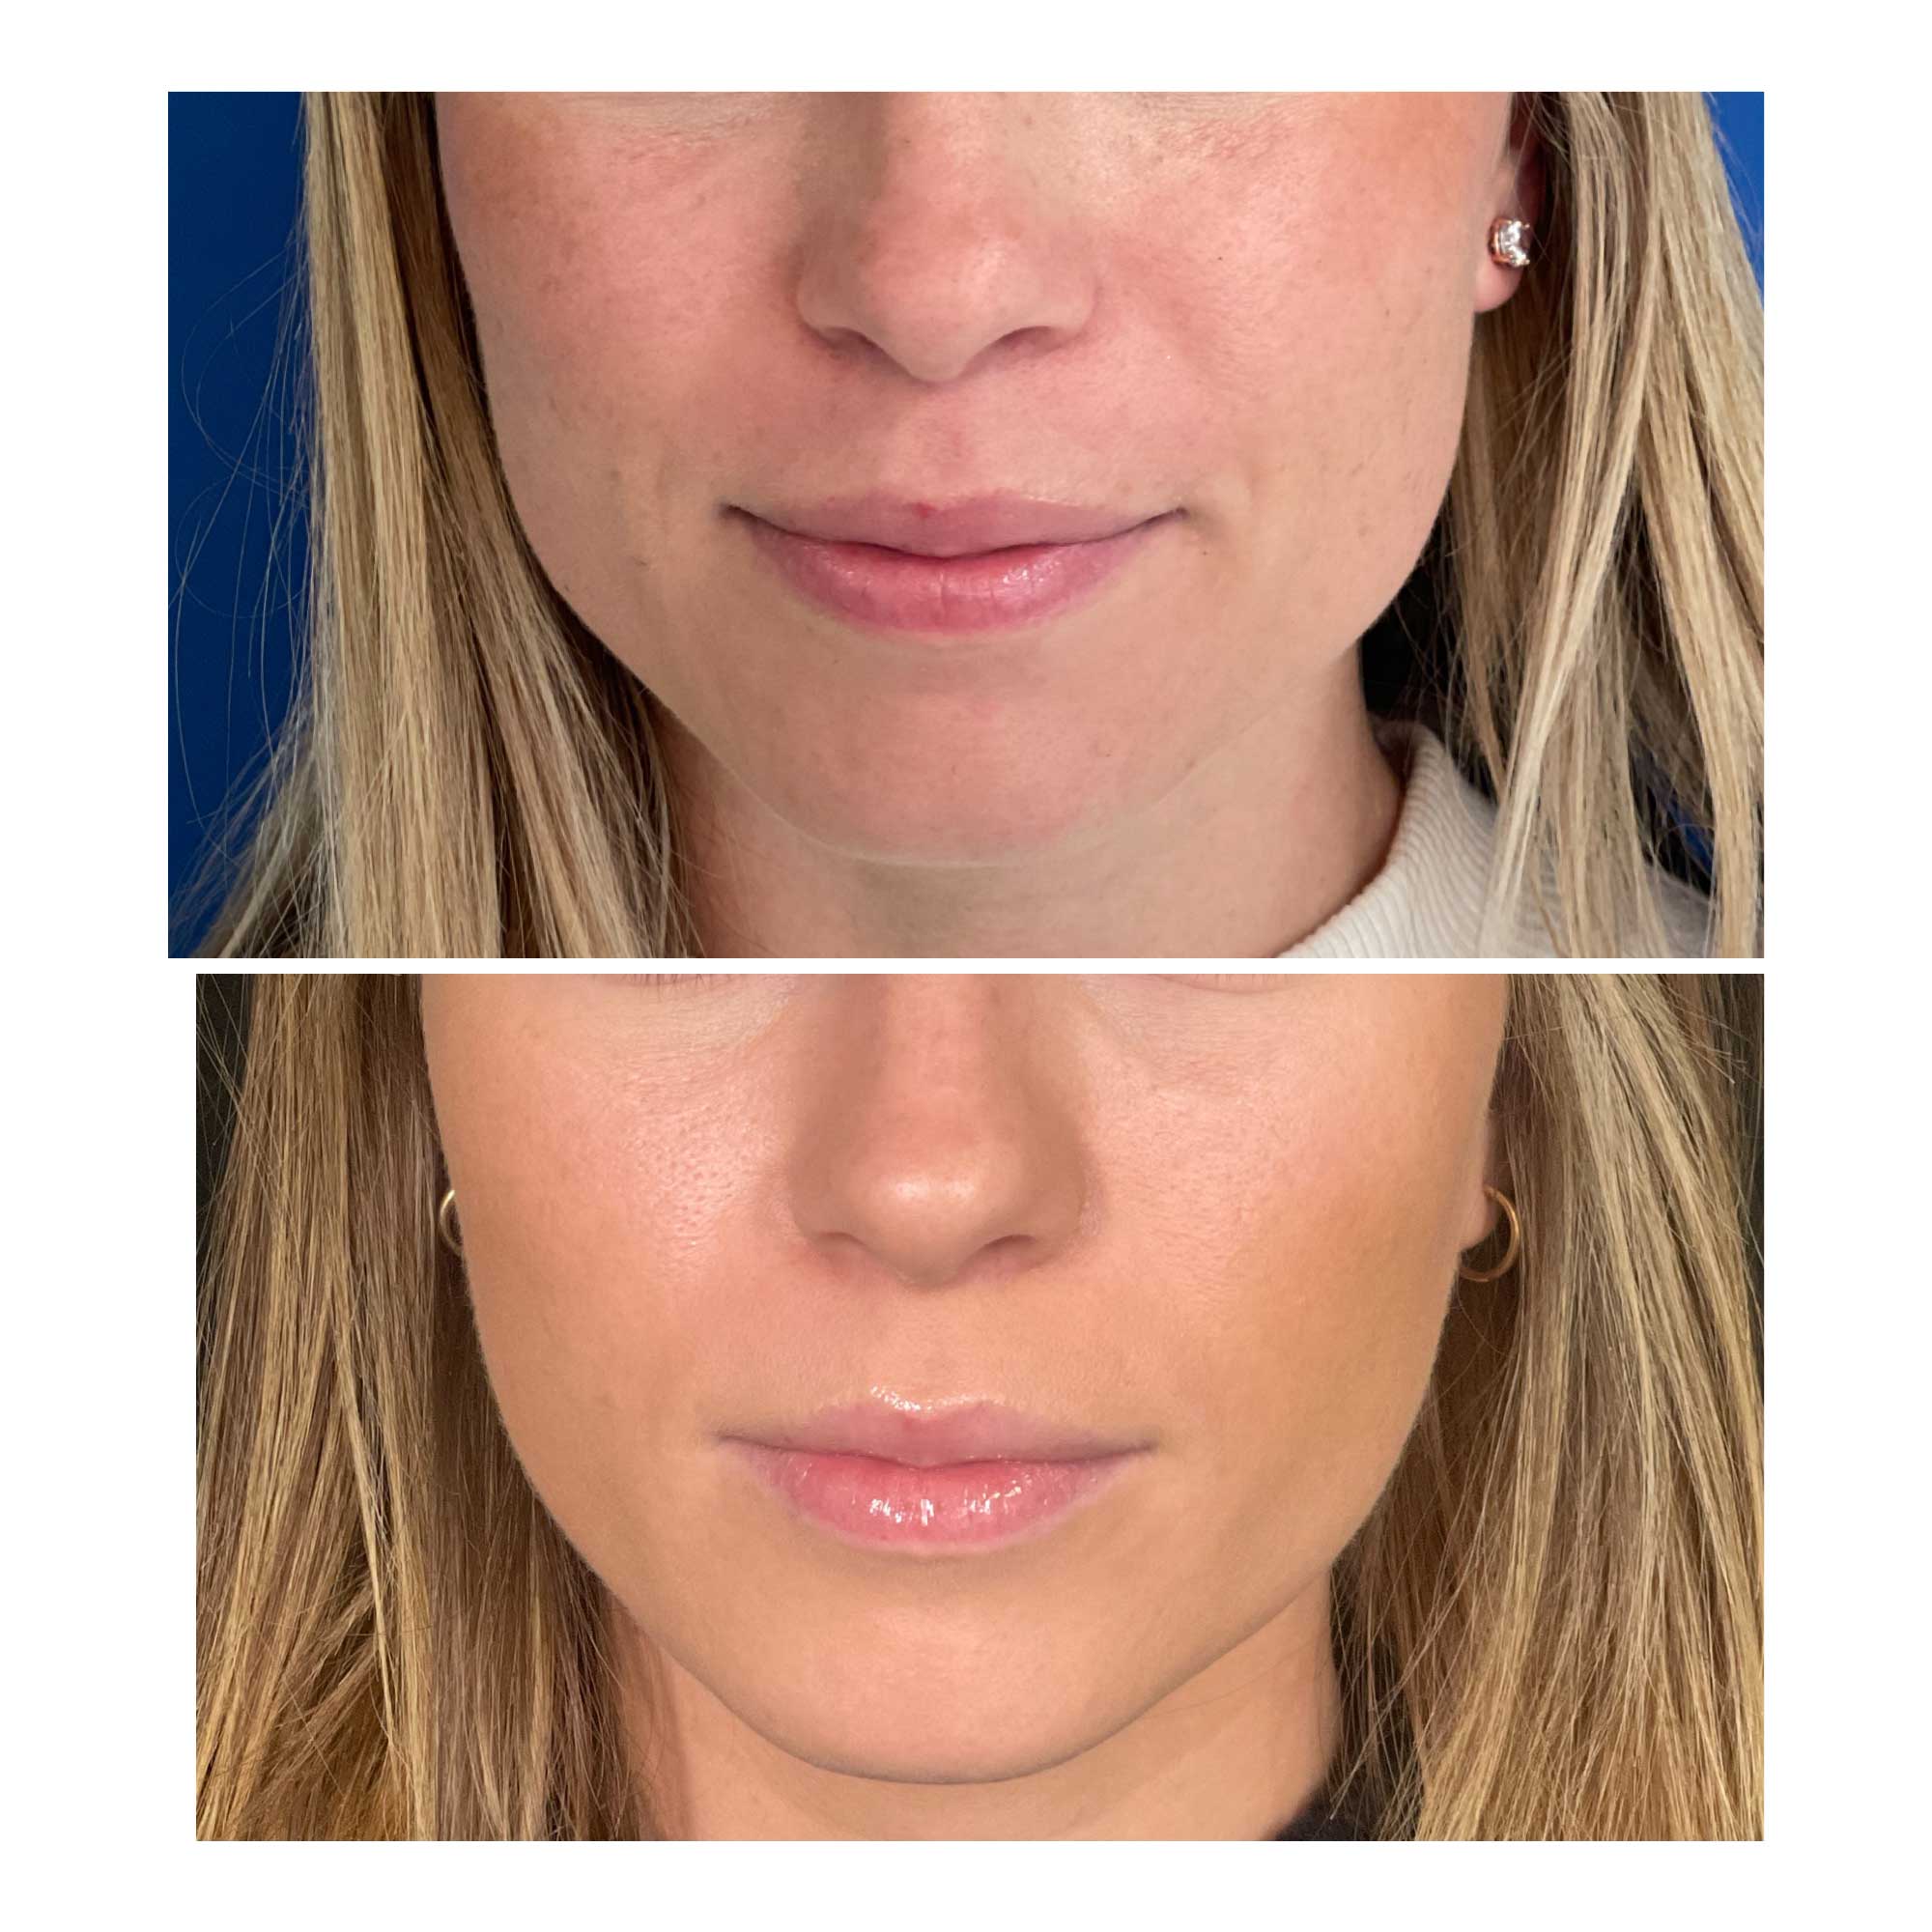 Woman's Masseters with BOTOX Before and After images from Refresh Aesthetic Center in Whitefish Bay WI